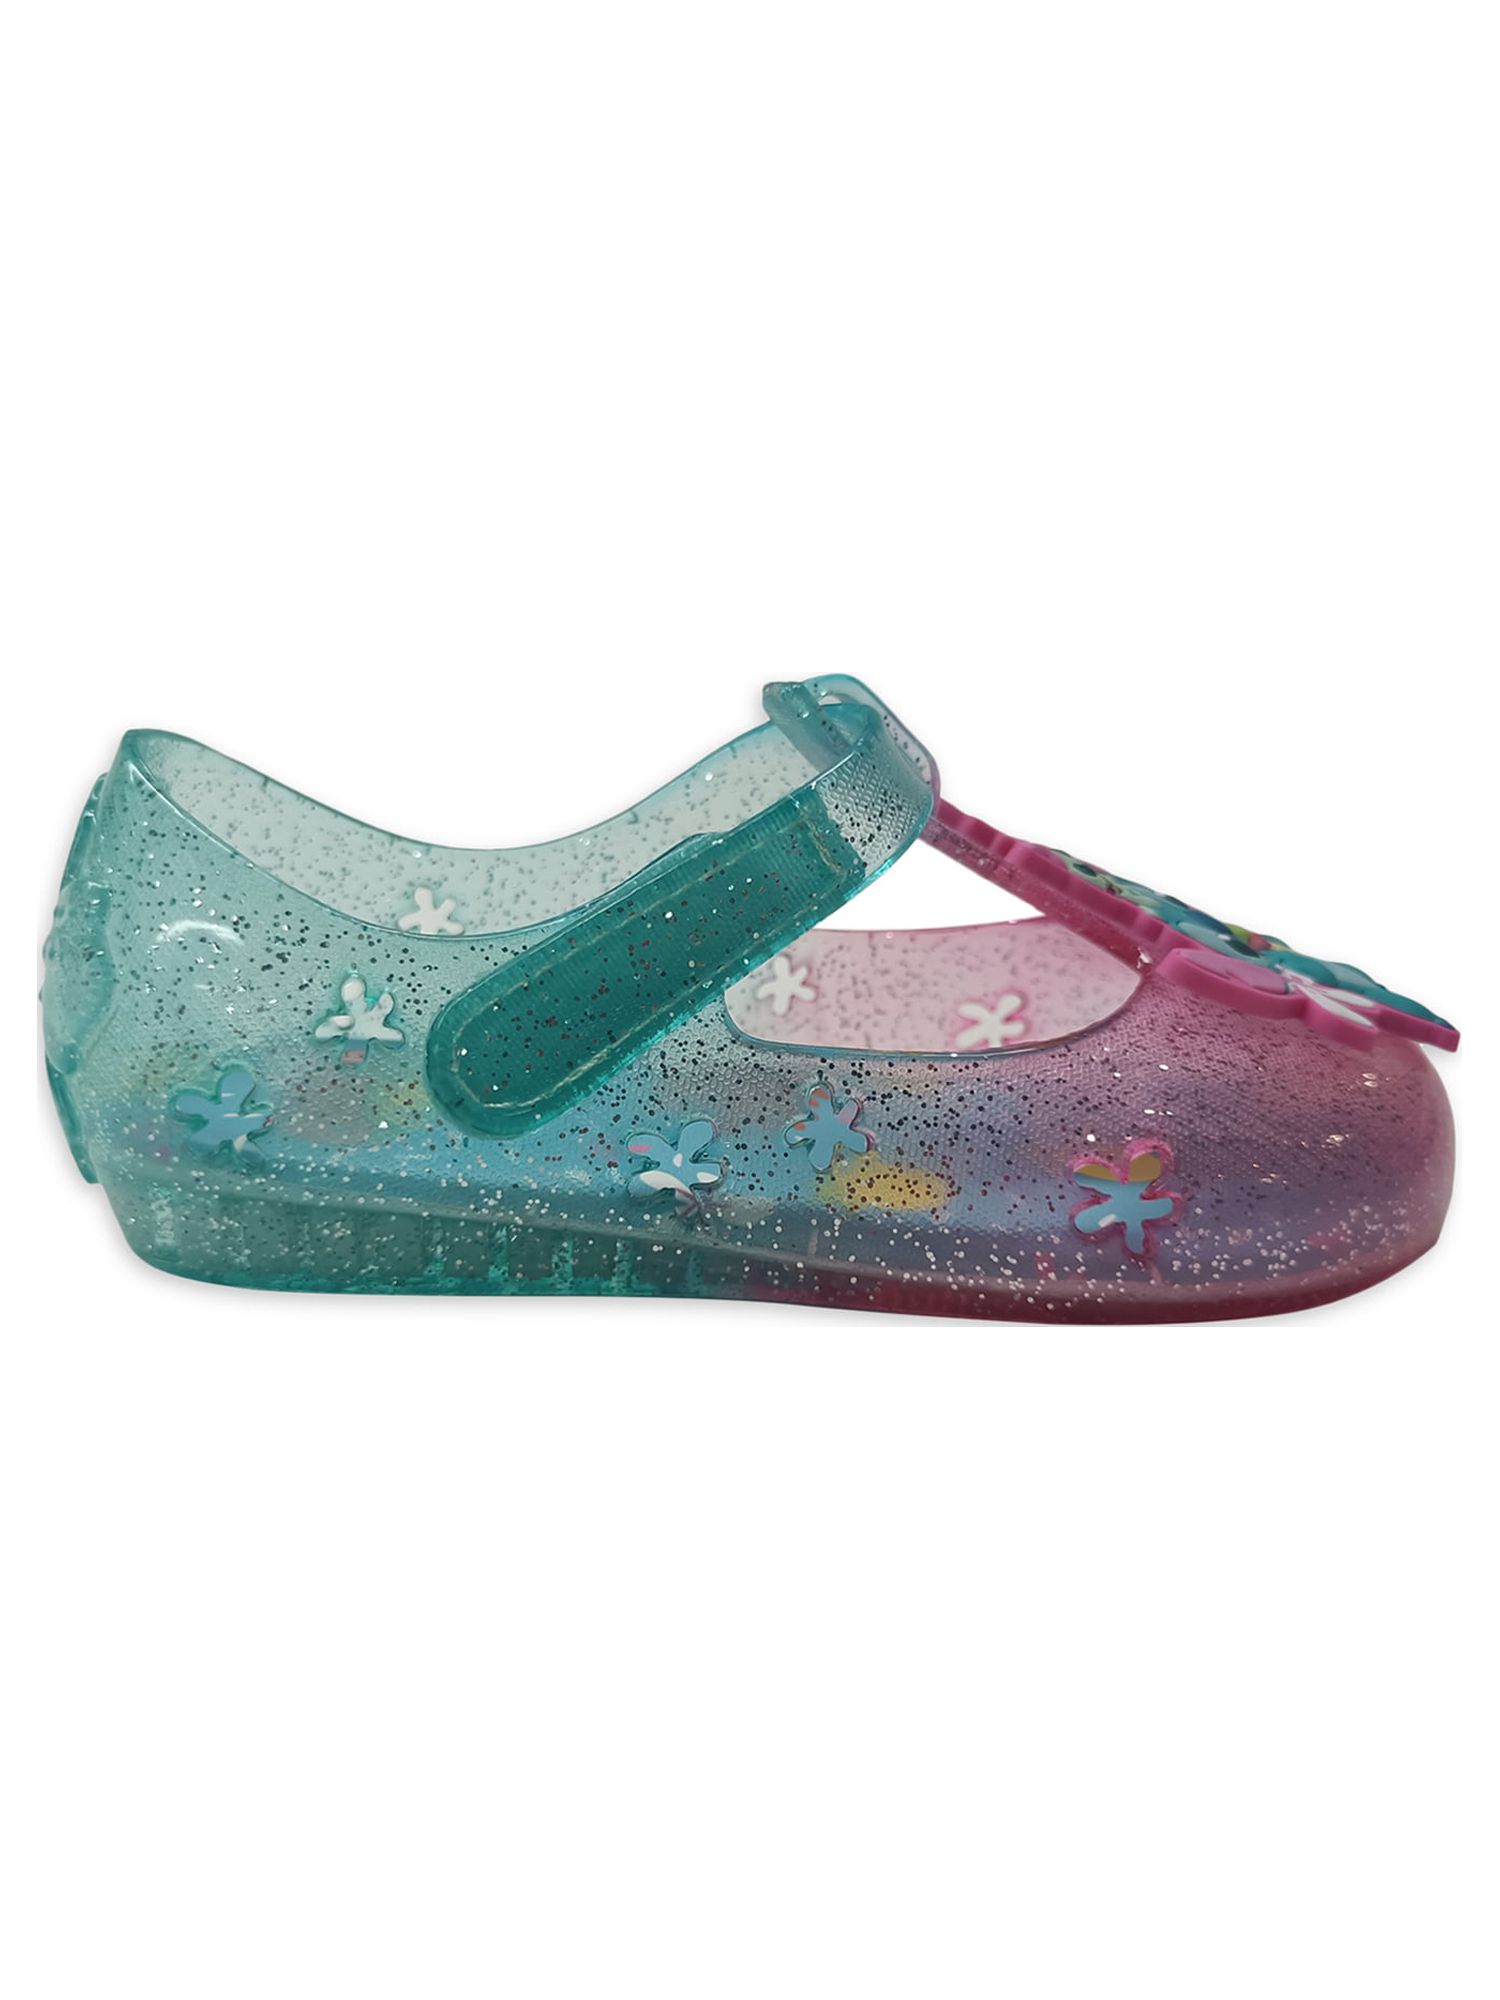 Disney Lilo & Stitch Toddler Girls Tropical Casual Jelly Shoe, Sizes 7-12 - image 5 of 6